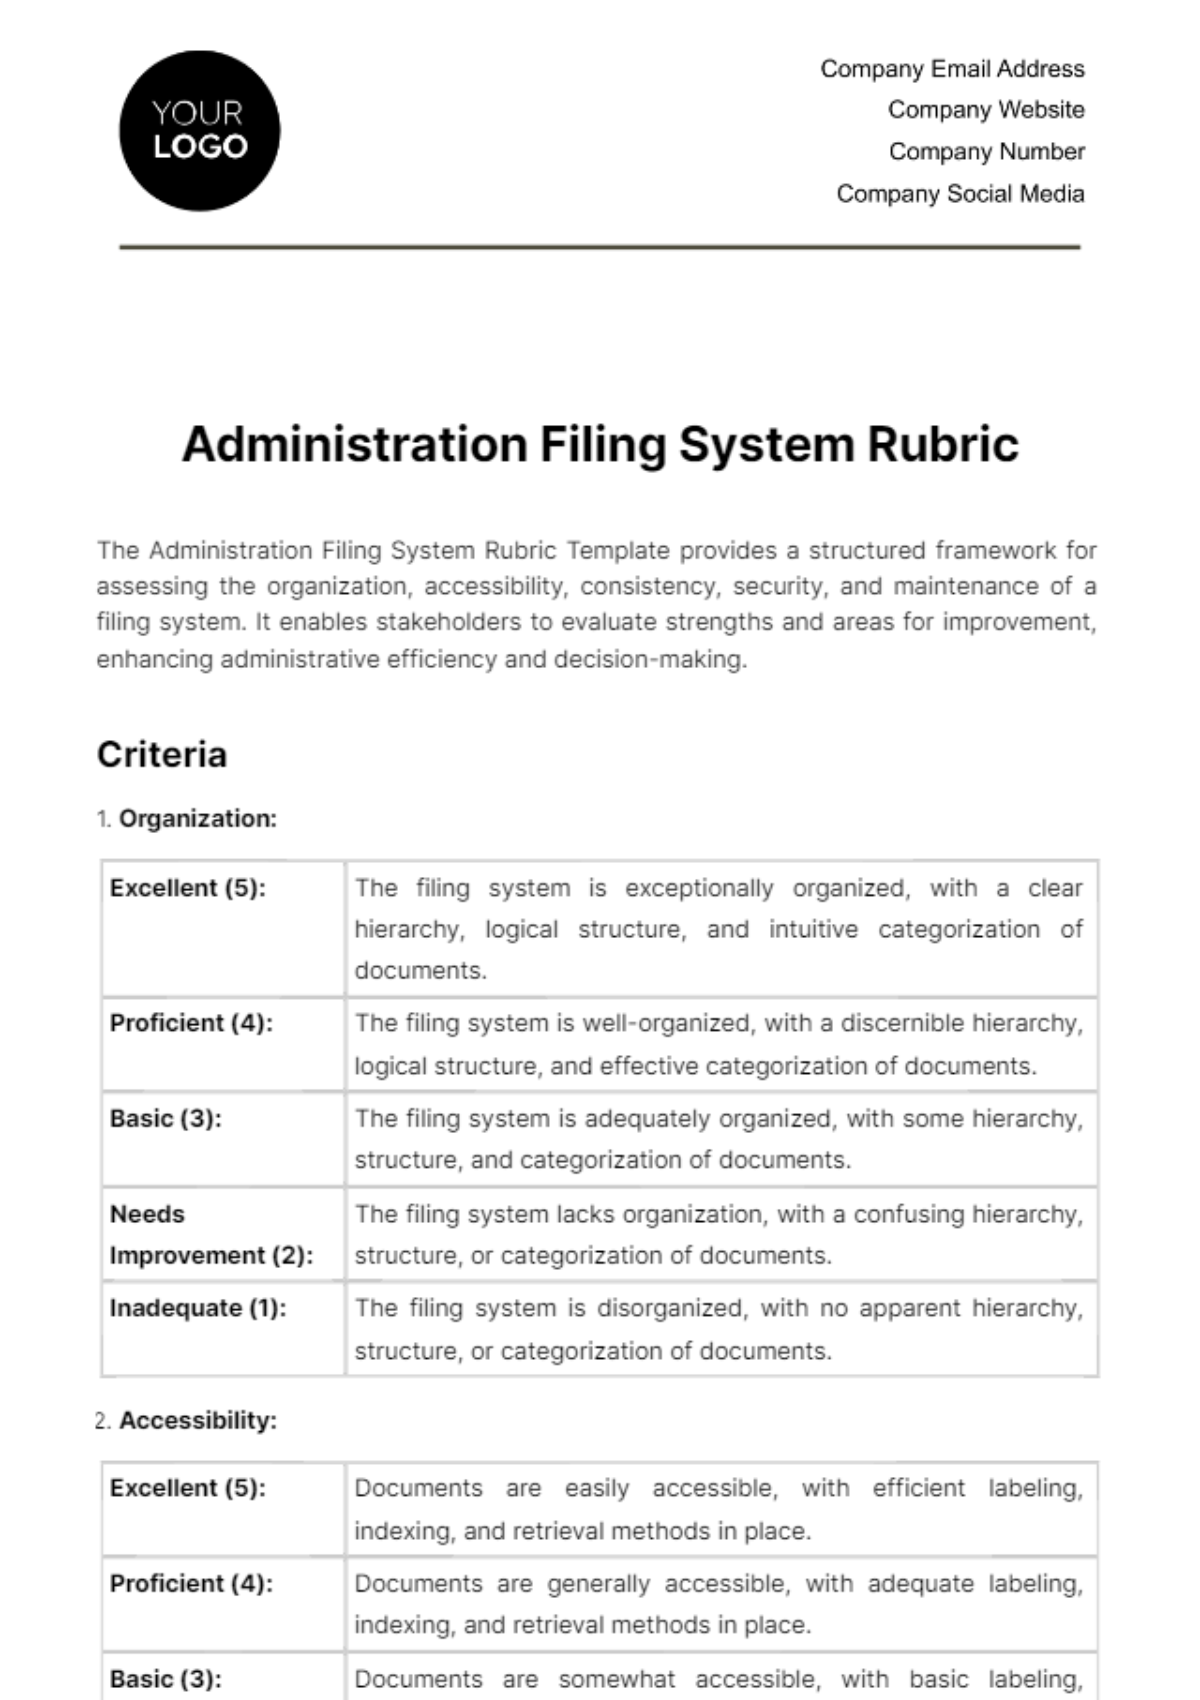 Administration Filing System Rubric Template